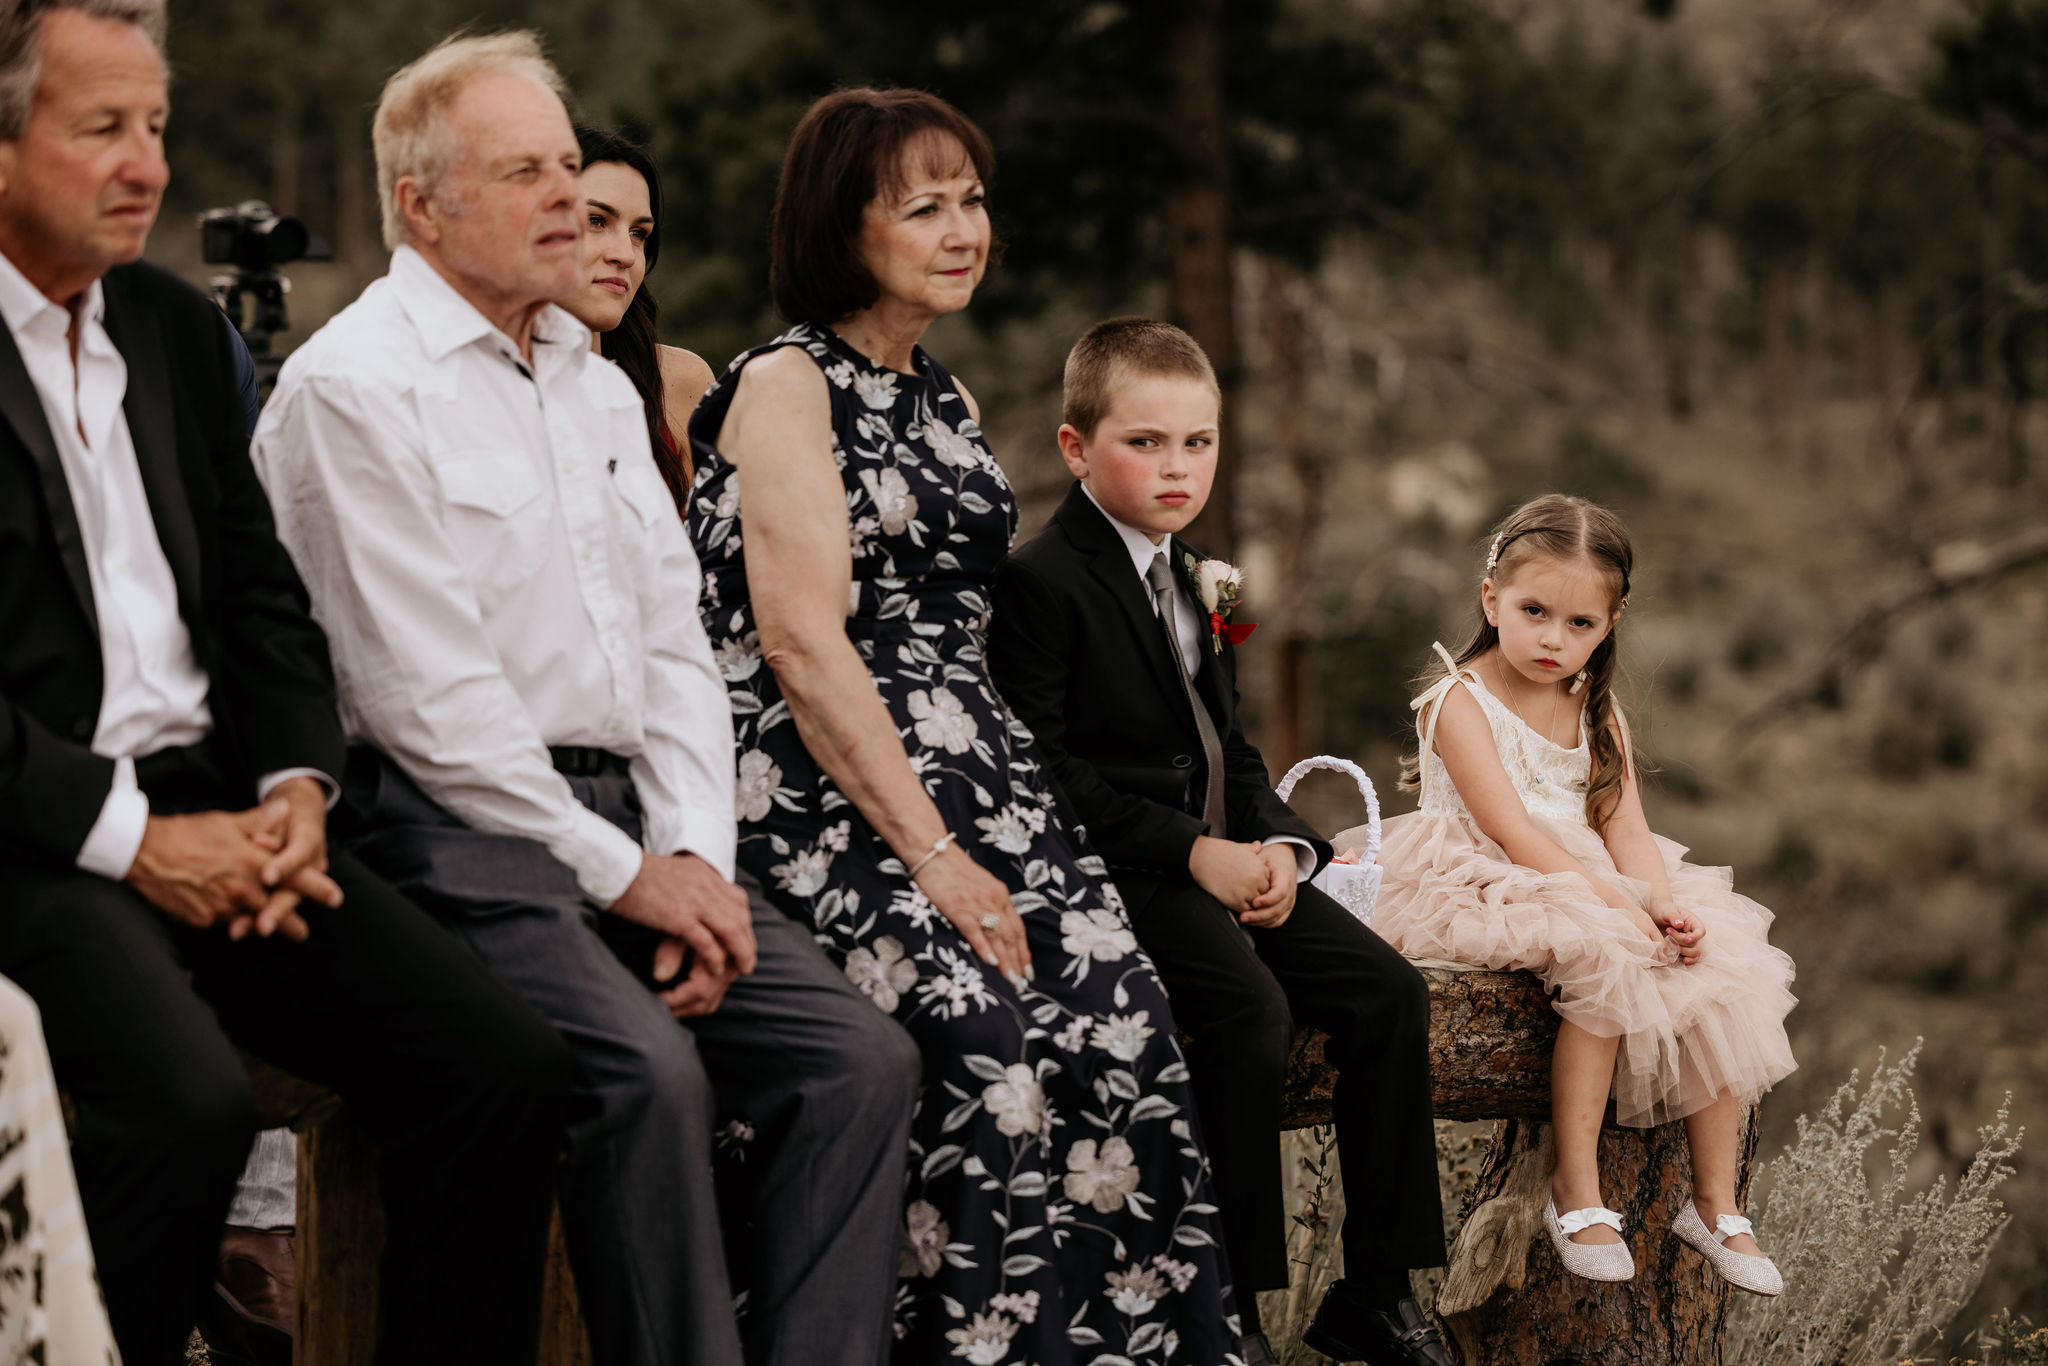 kids sit on a bench during a wedding ceremony